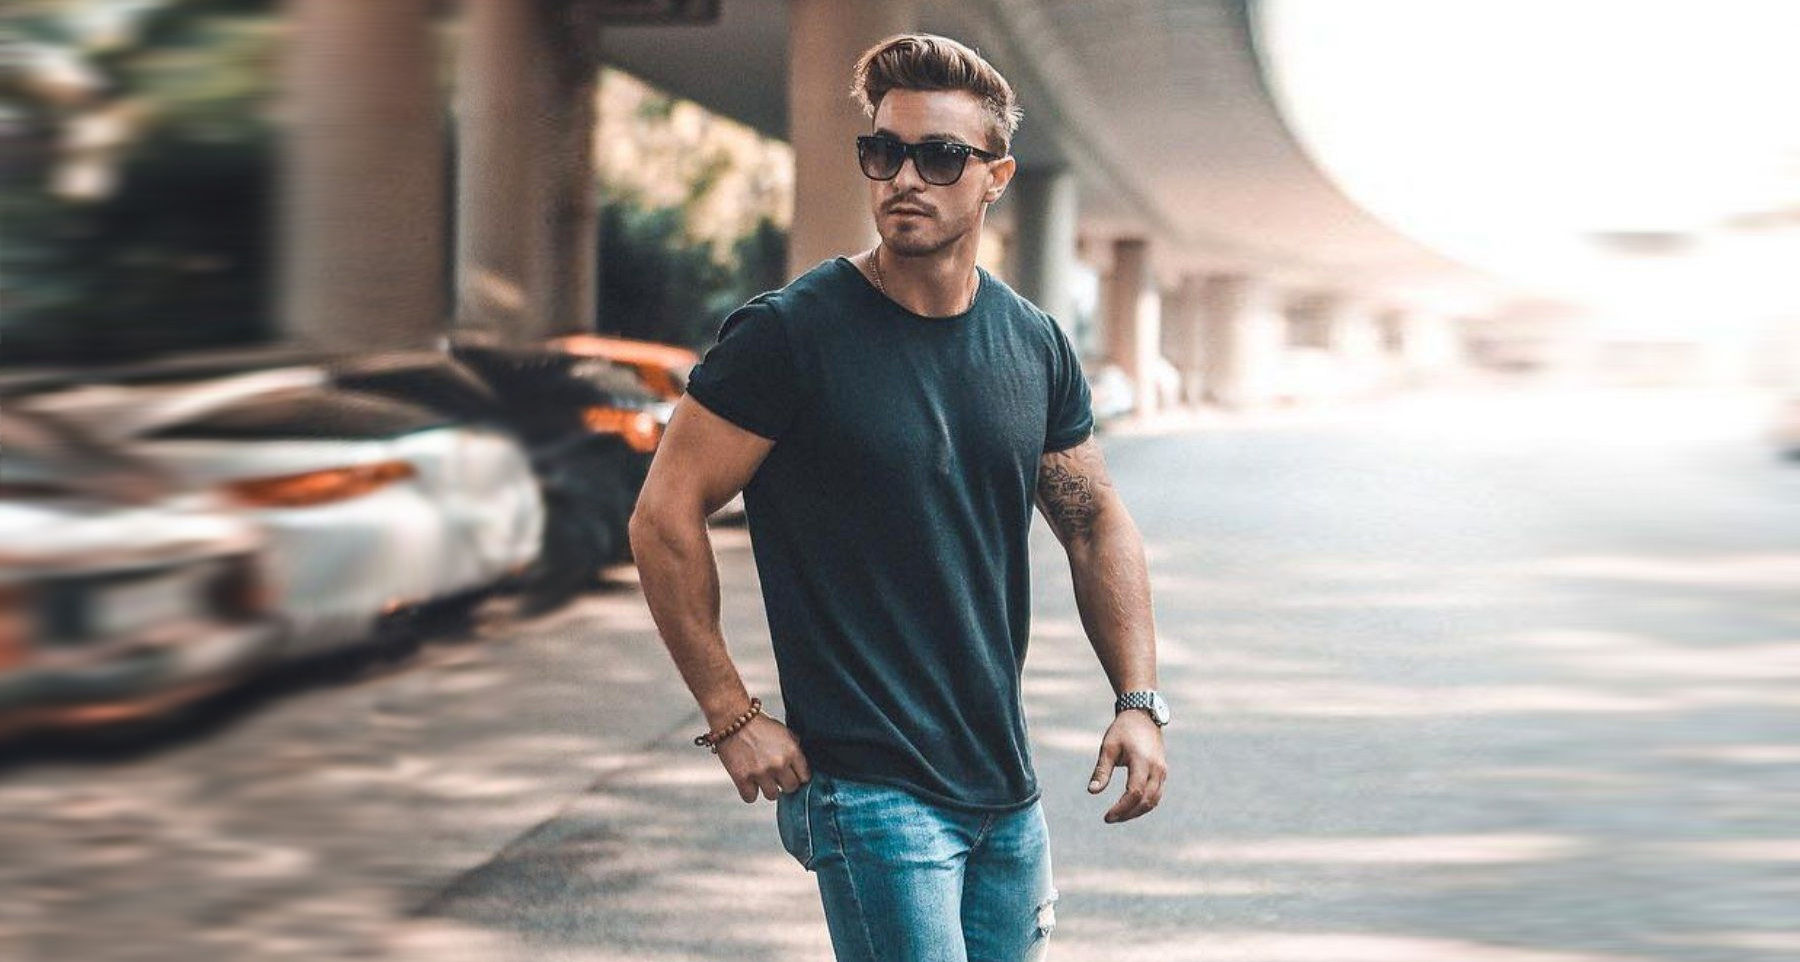 WEEKEND SHOP T Shirt for Man T Shirt Brand Big Size T Shirt Casual Summer Breathable Tees